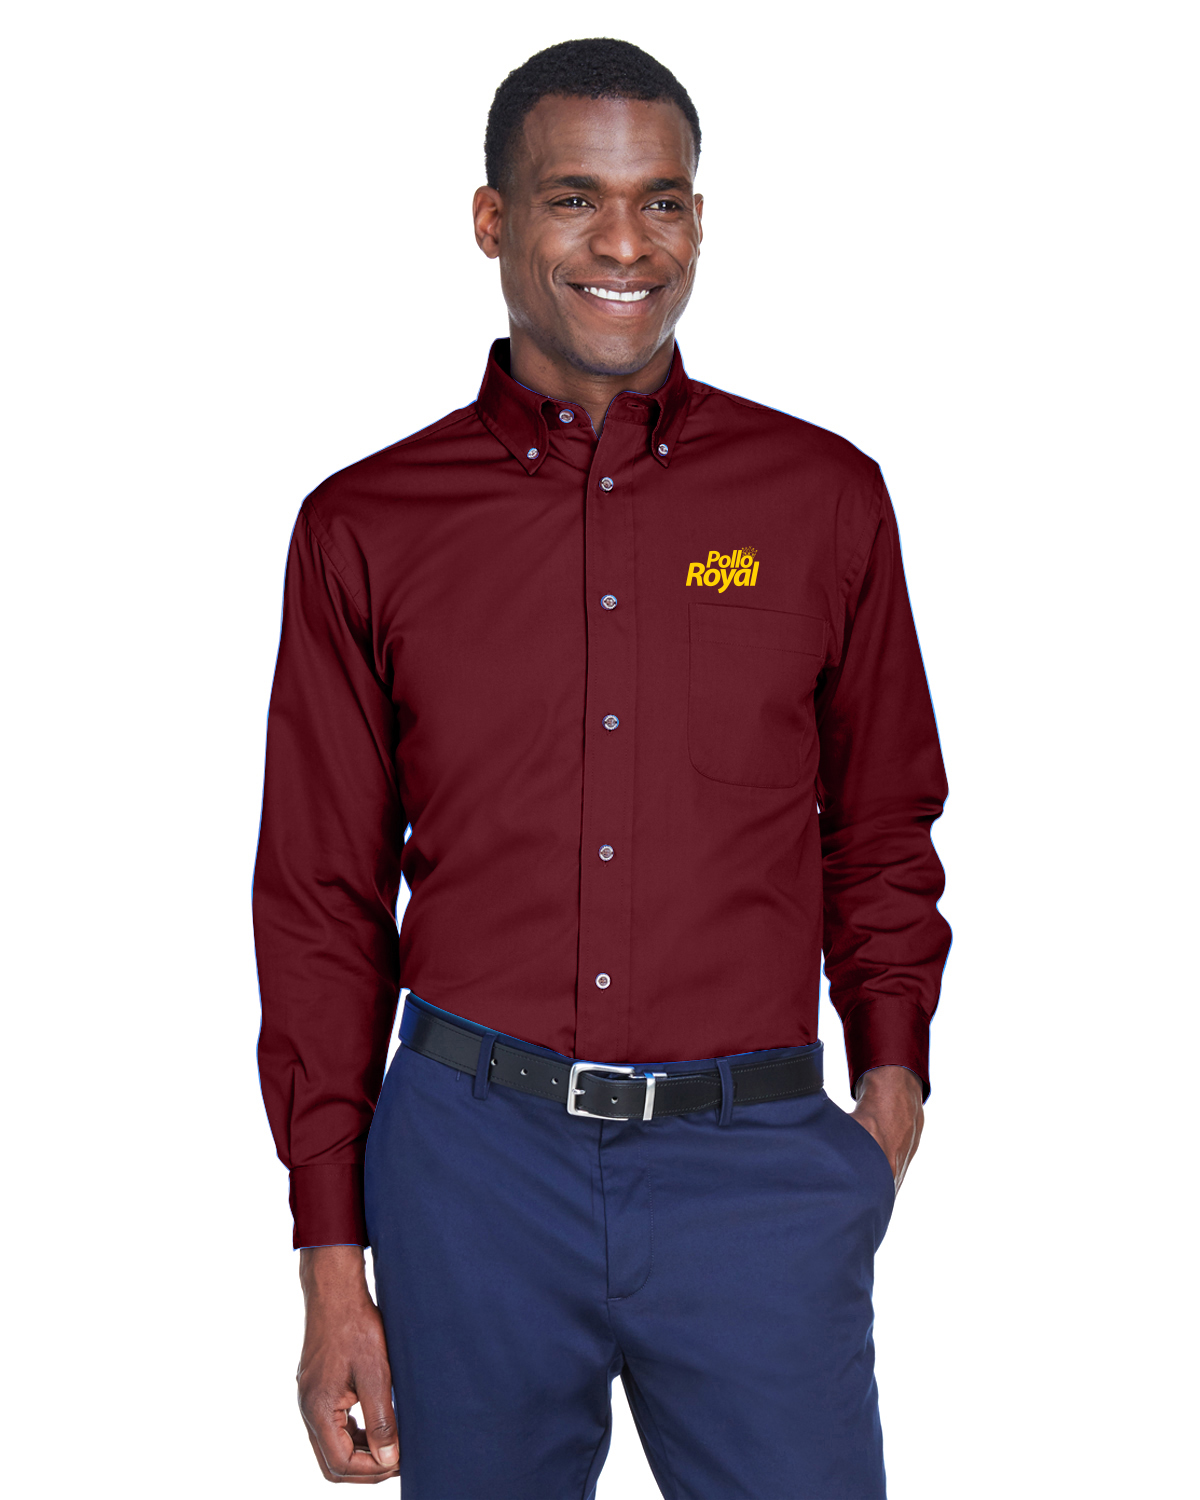 M500 Pollo Royal Men\'s Easy Blend™ Long-Sleeve Twill Shirt with Stain-Release